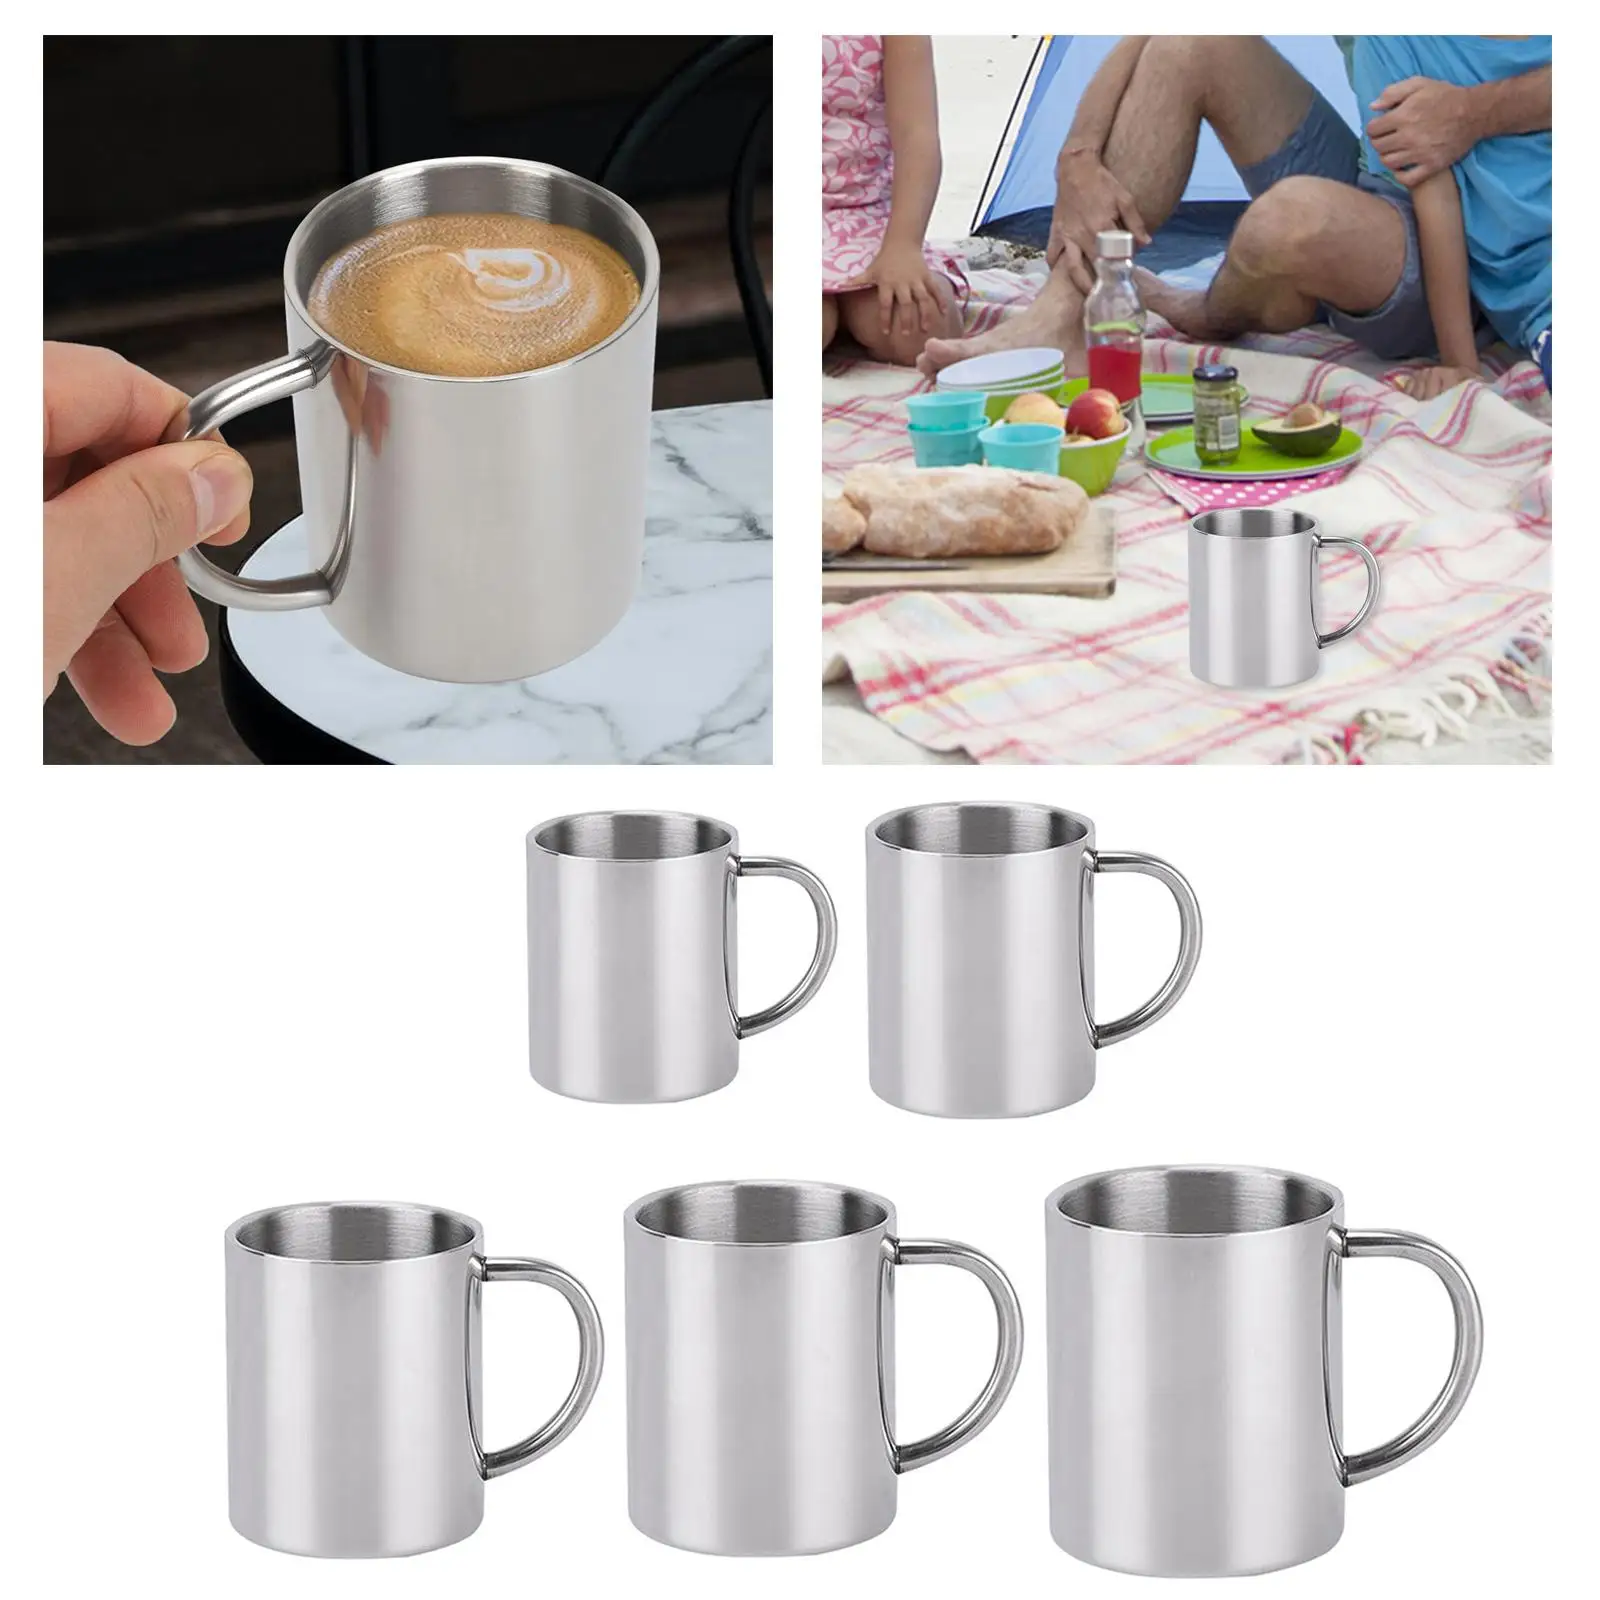 Stainless Steel Coffee Mug Double Wall Anti Scalding Beer Mug Juice Drinking Cup for Hot or Cold Drinks Travel Camping Outdoor